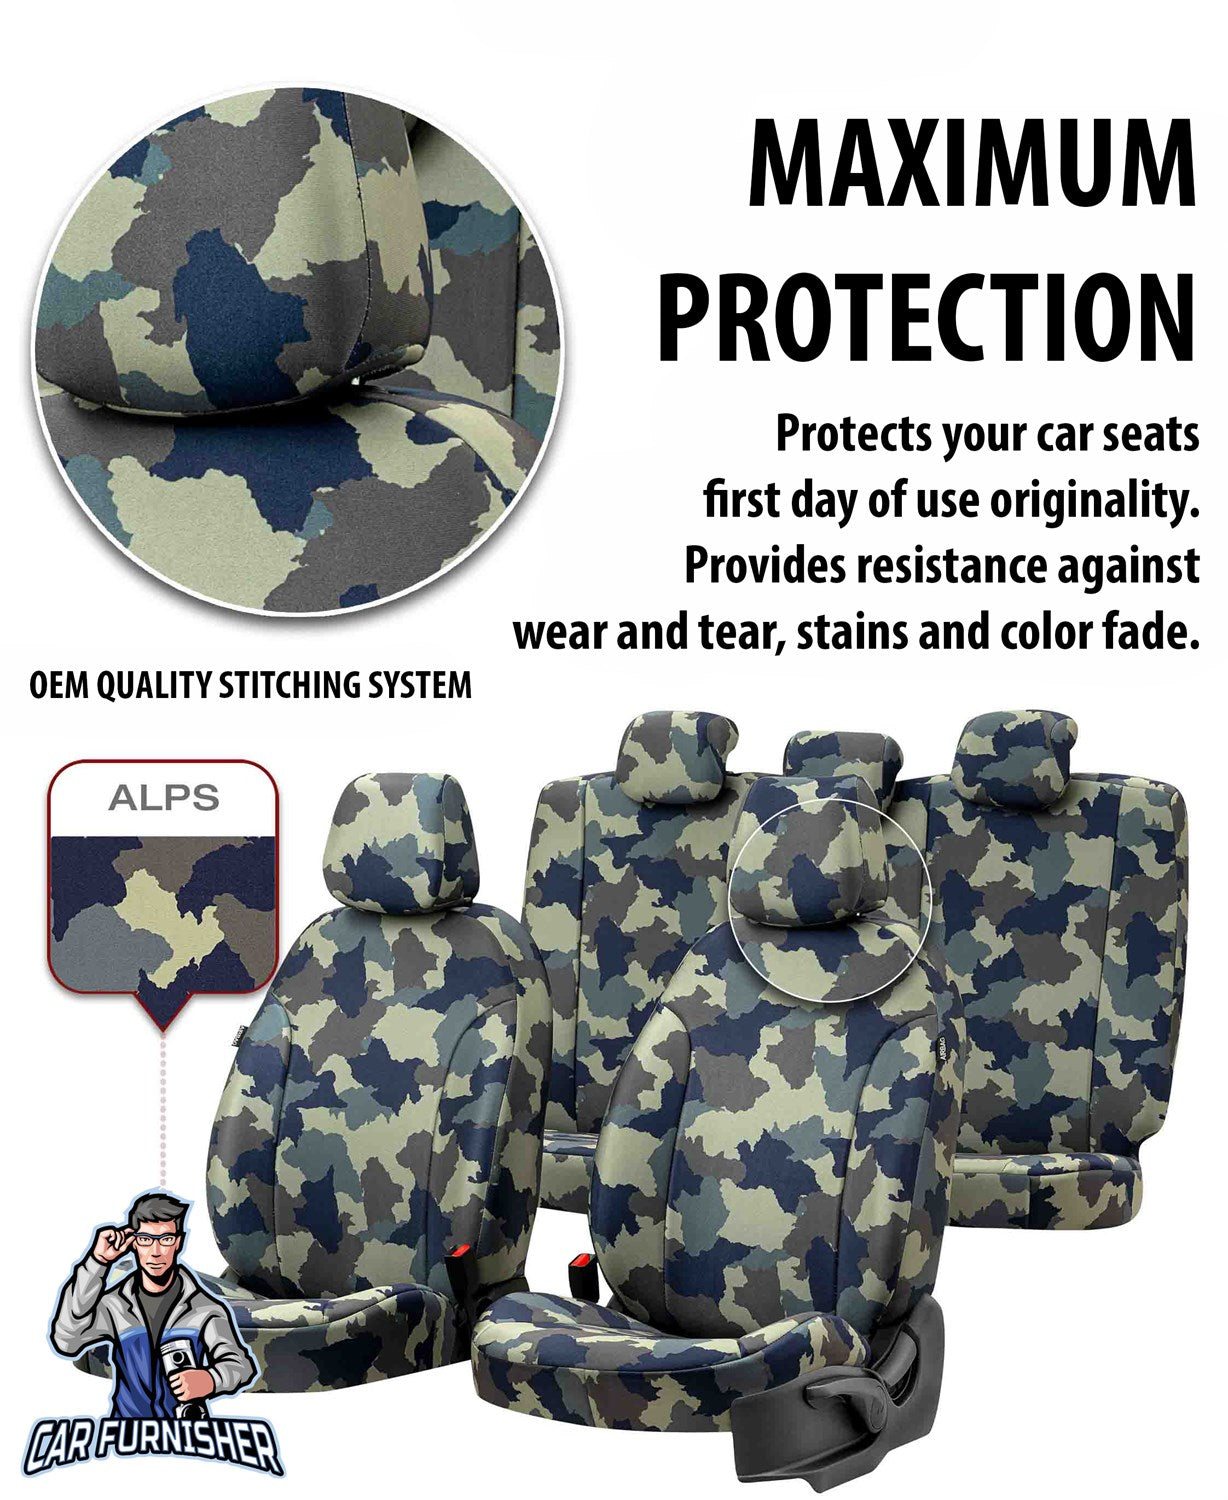 Renault 19 Seat Cover Camouflage Waterproof Design Montblanc Camo Waterproof Fabric